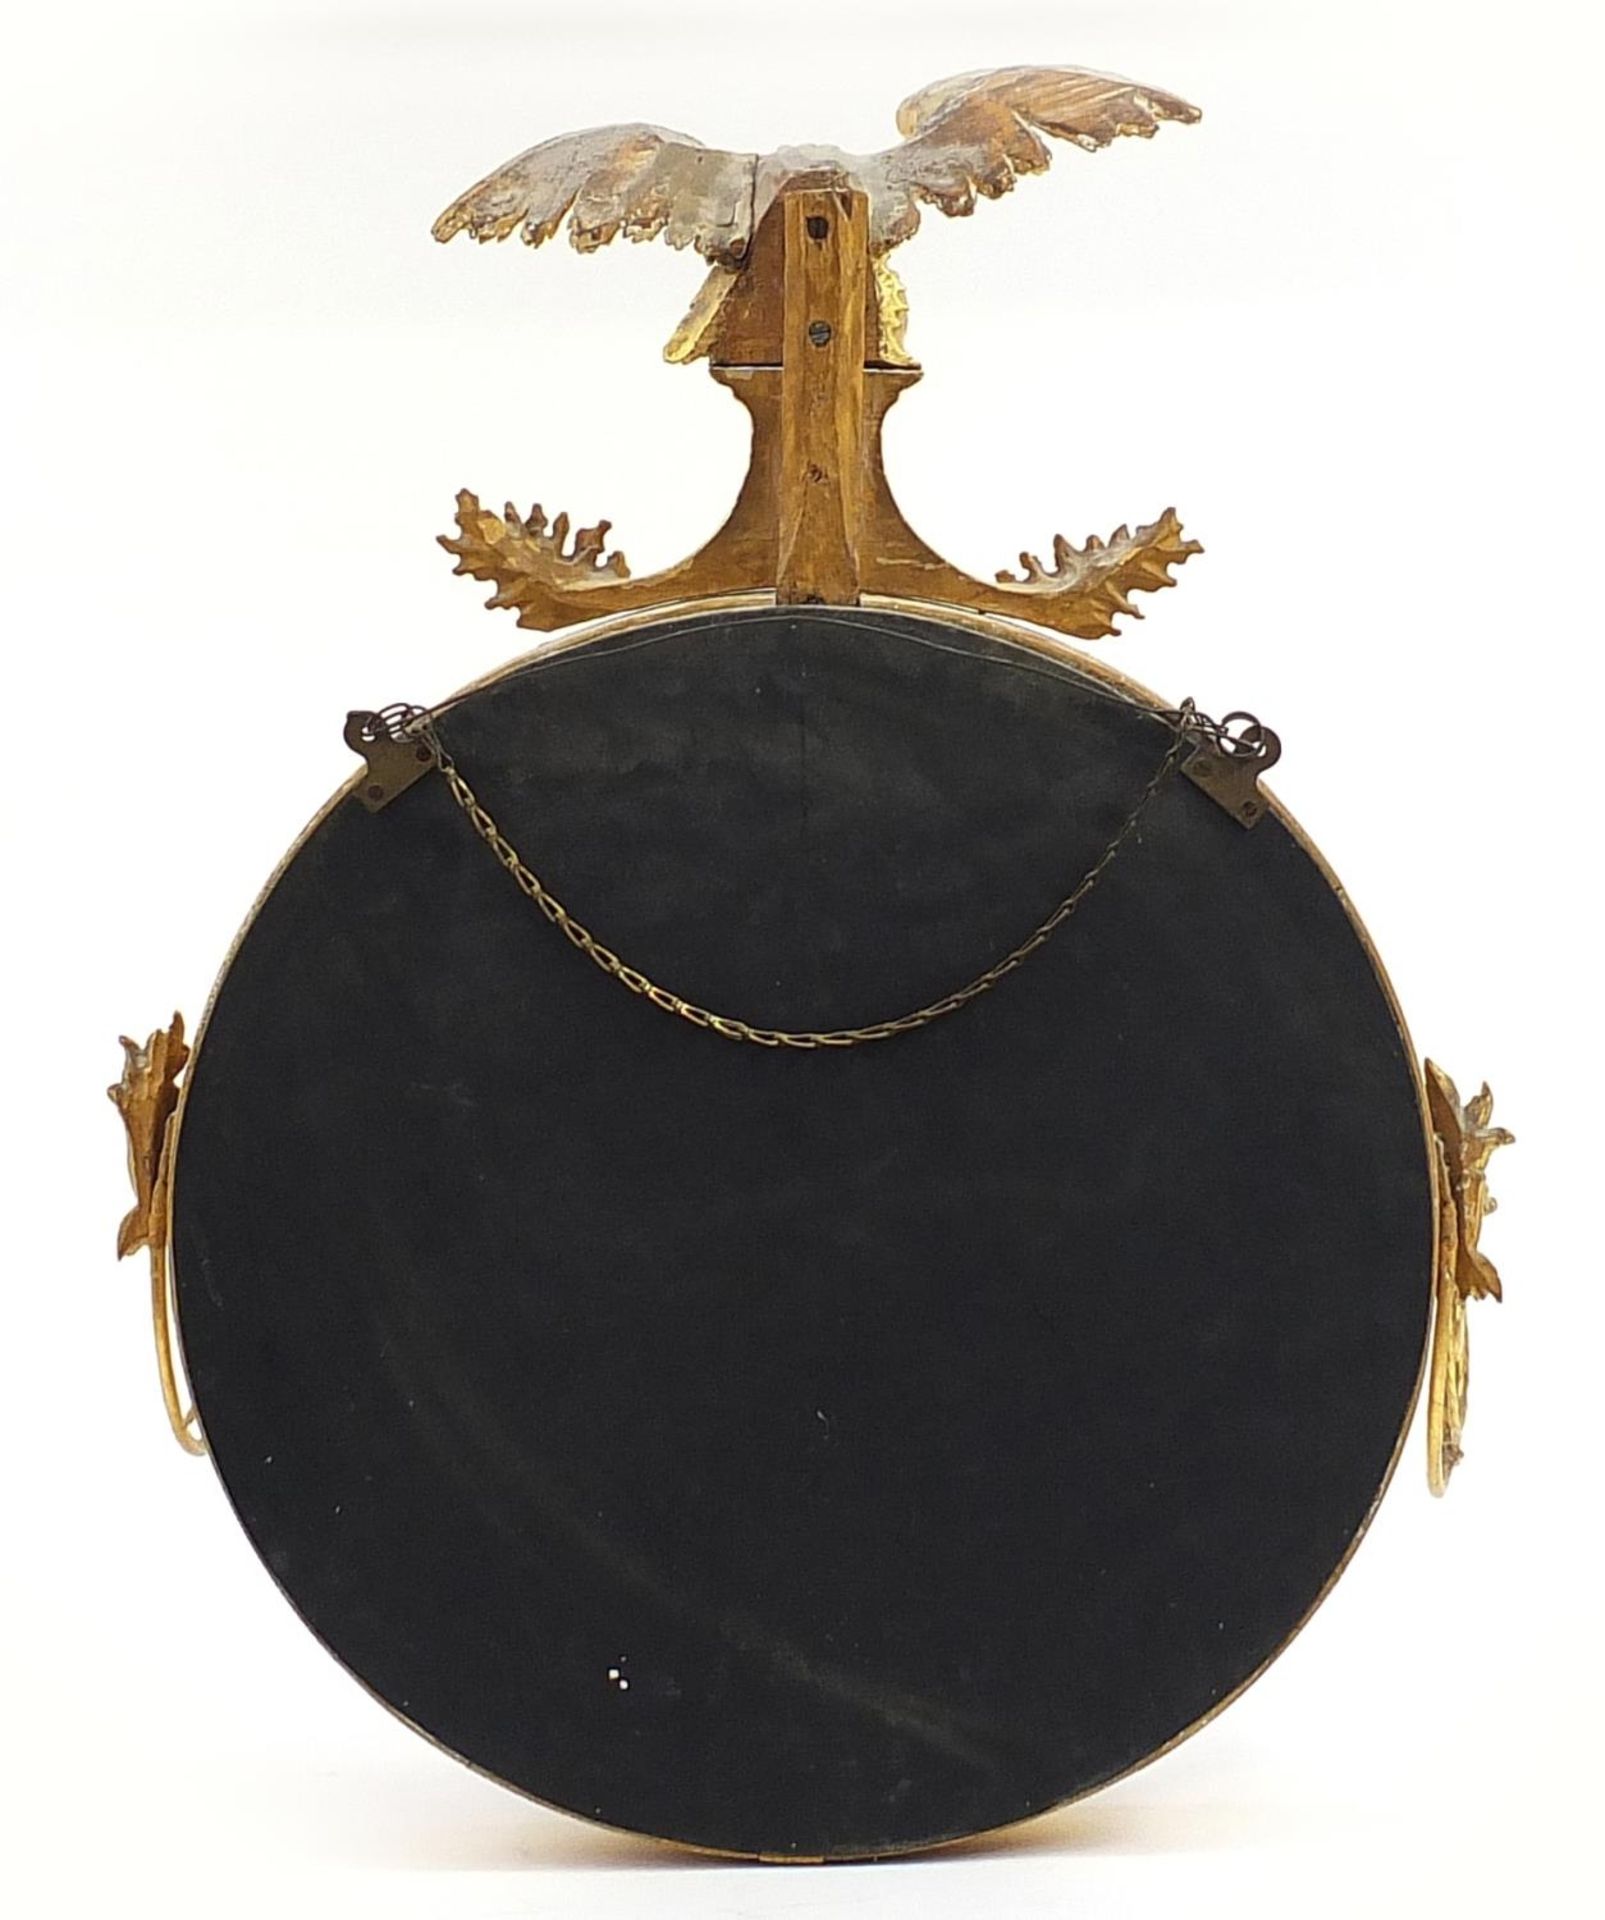 Regency giltwood convex wall mirror with sconces and eagle crest, 75cm high - Image 2 of 2